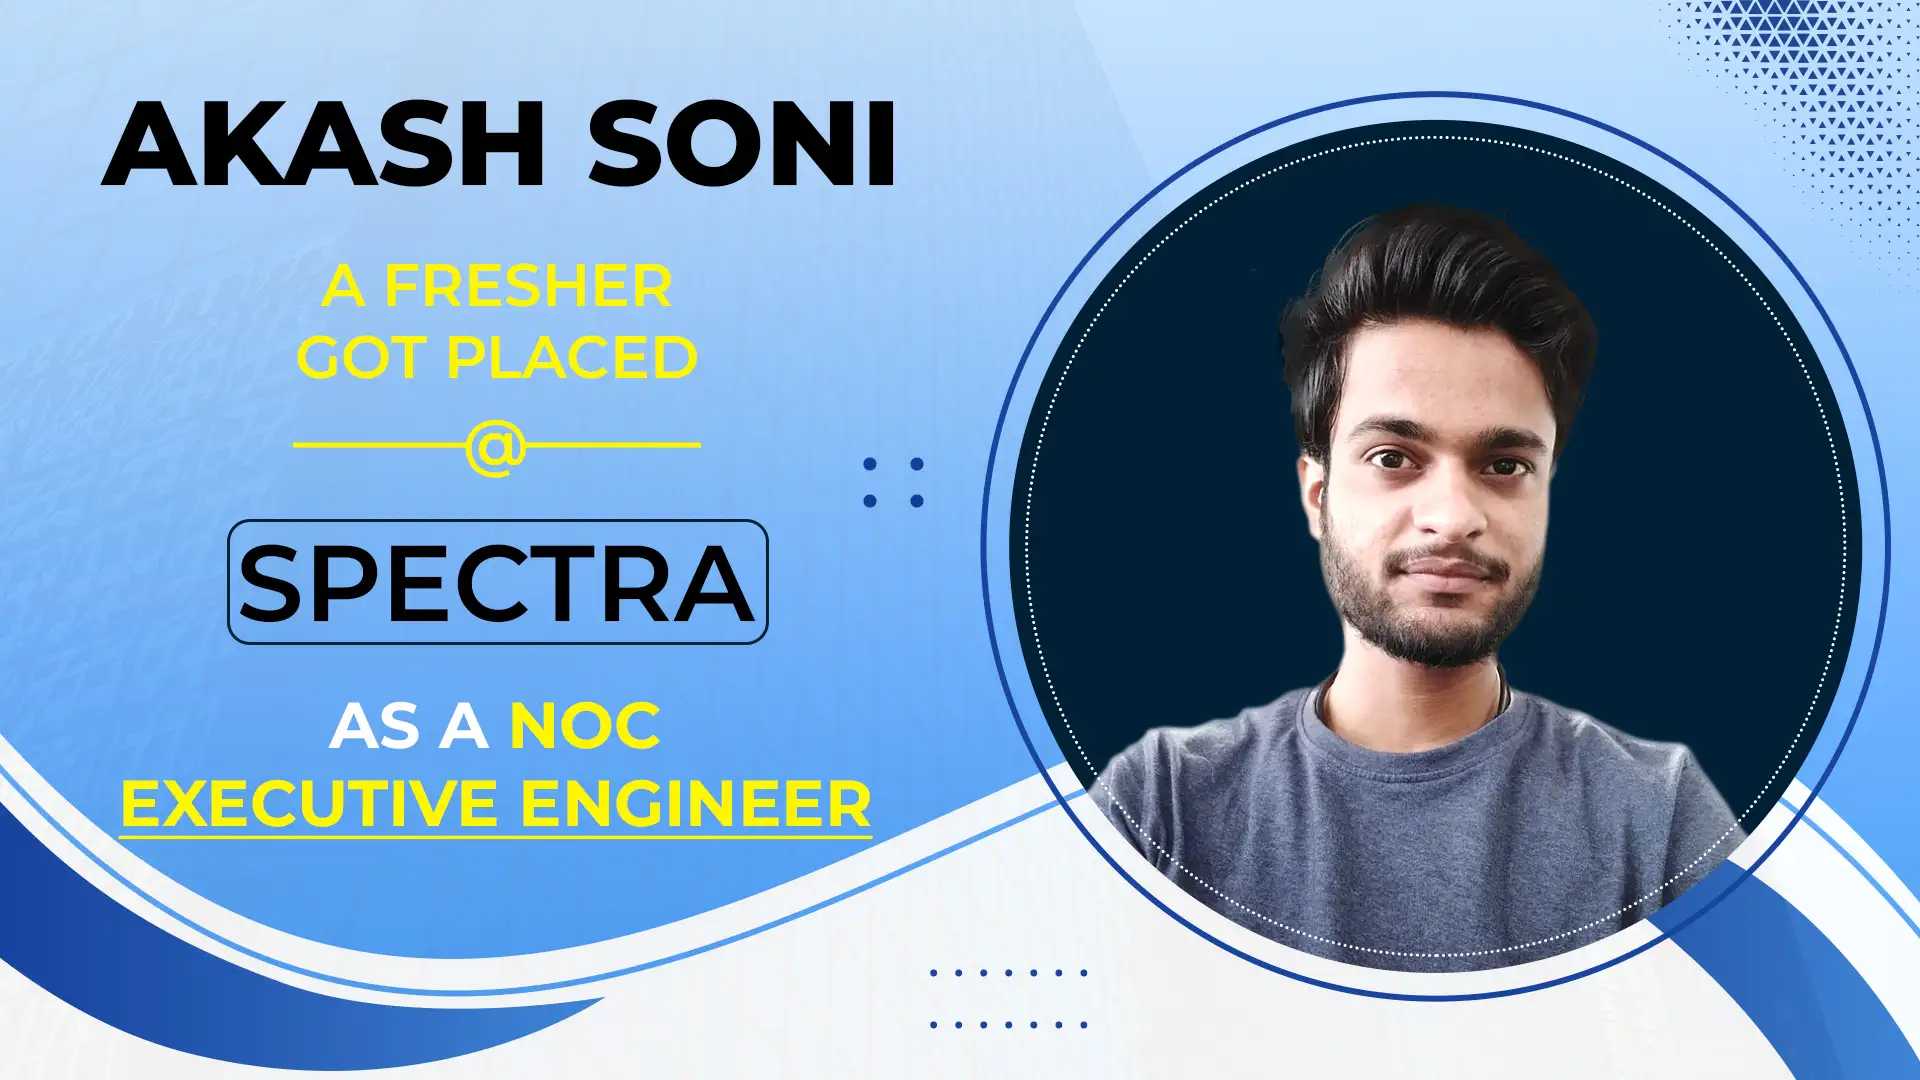 Akash Soni a fresher got placed @ Spectra as a NOC Executive Engineer